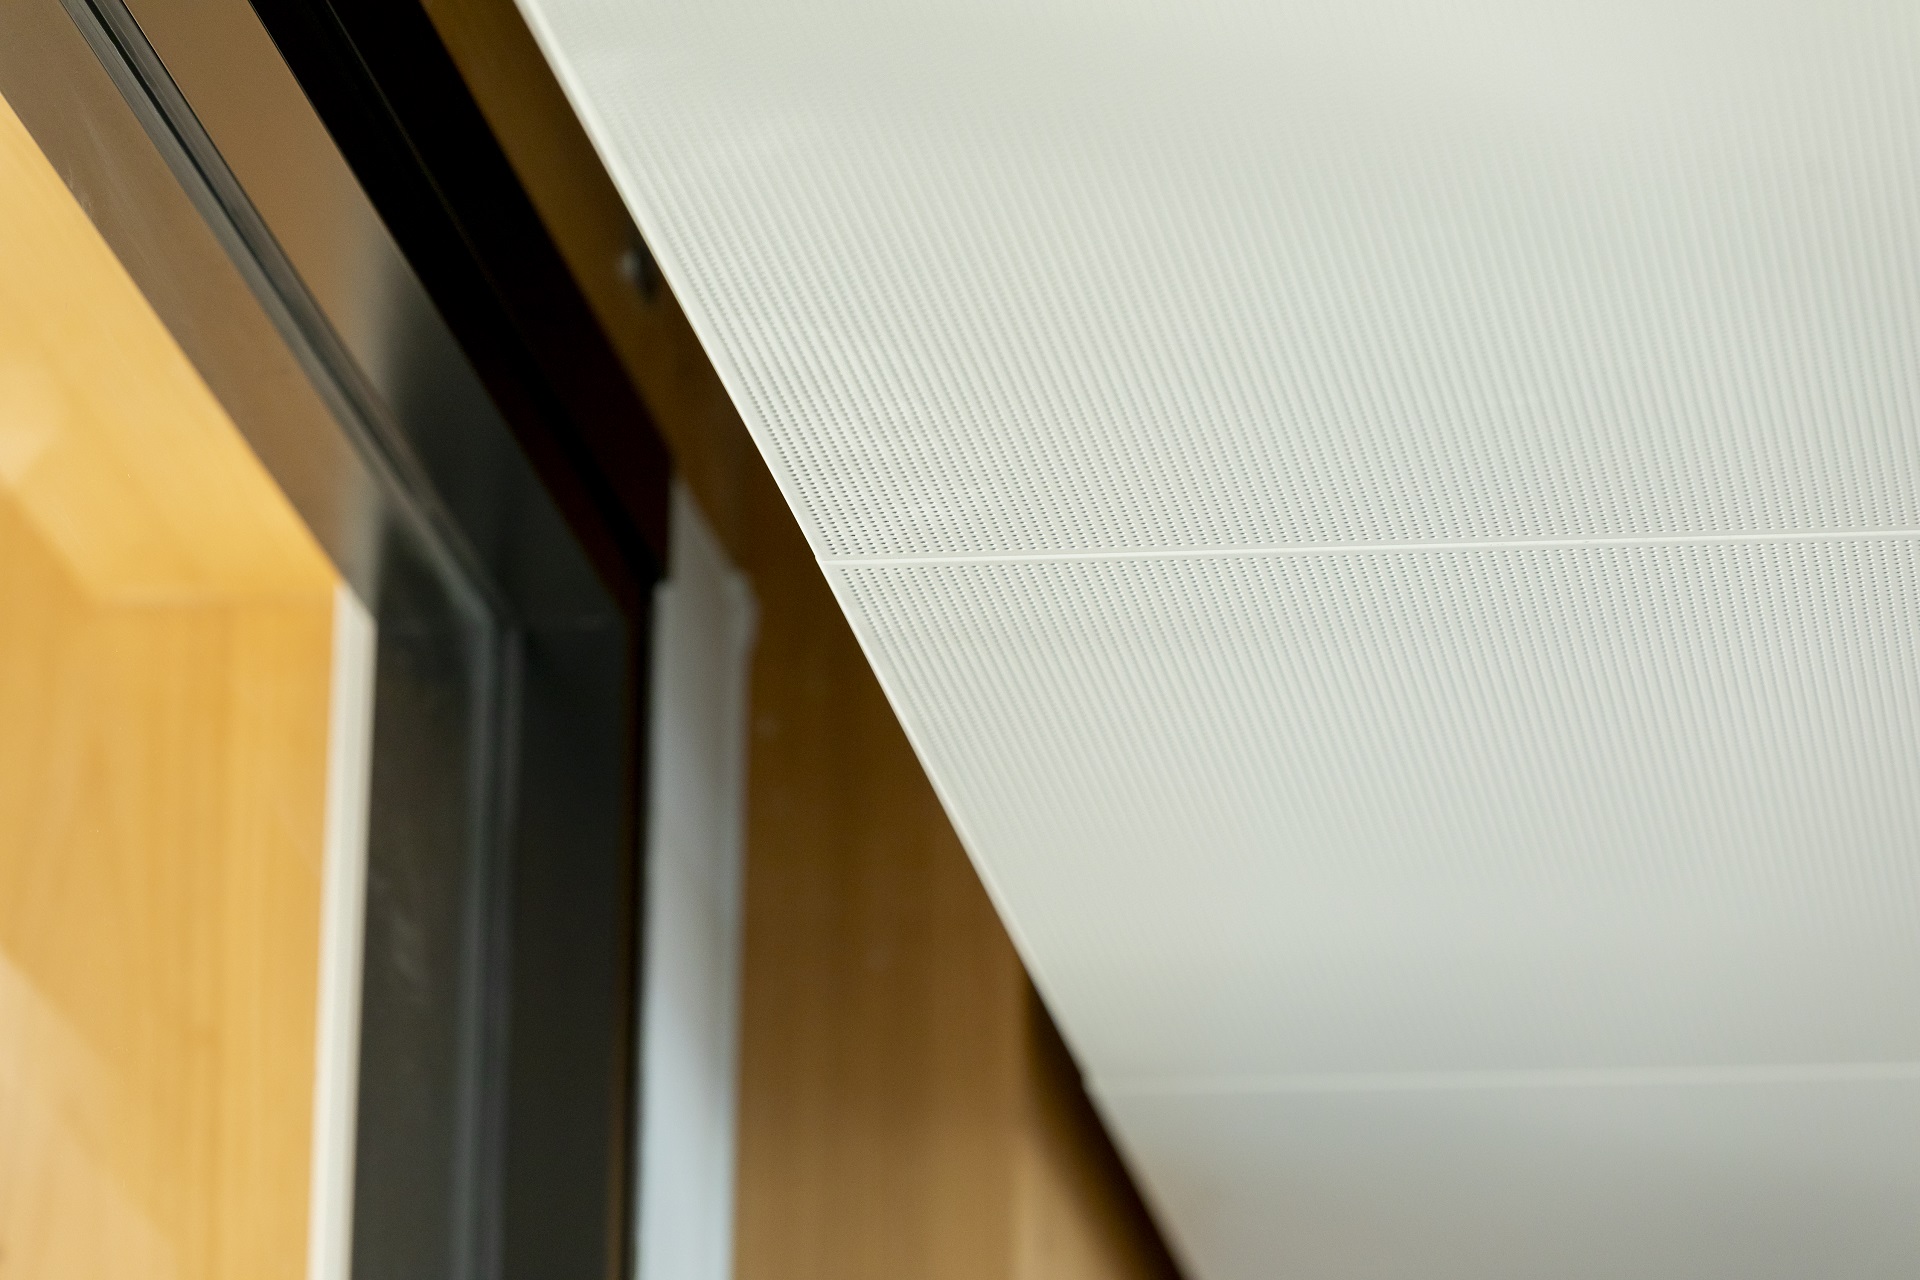 Metal ceilings can contribute to your project’s sustainability initiatives